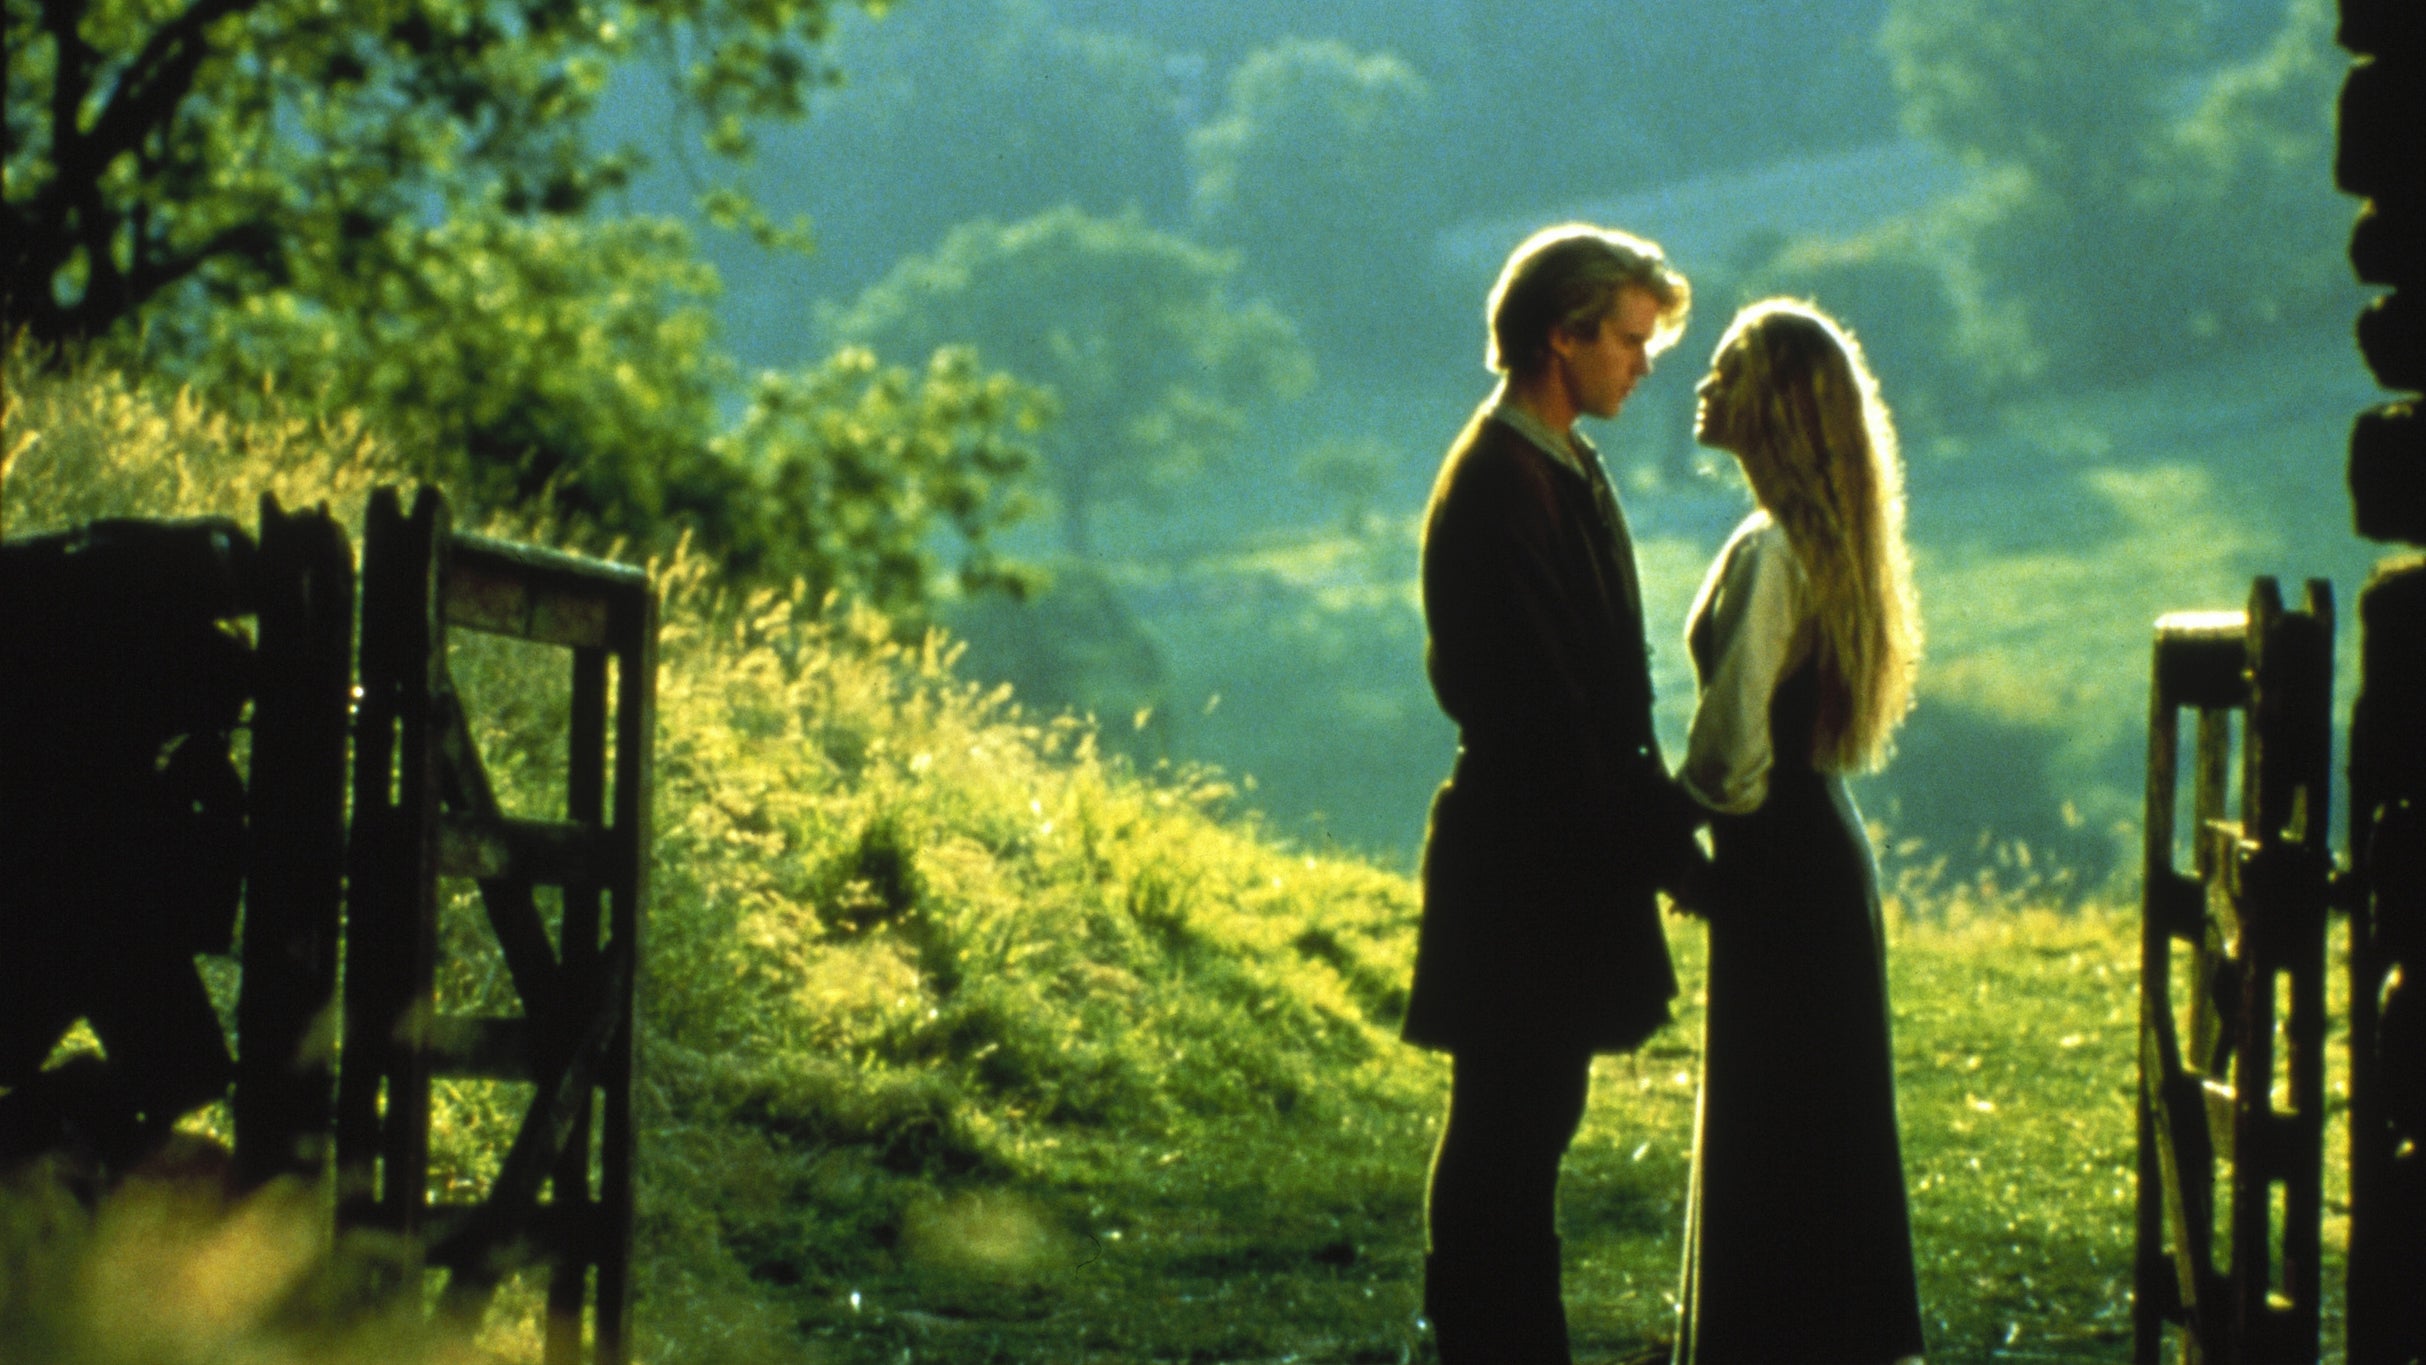 accurate presale password to The Princess Bride An Inconceivable Evening with Cary Elwes advanced tickets in San Diego